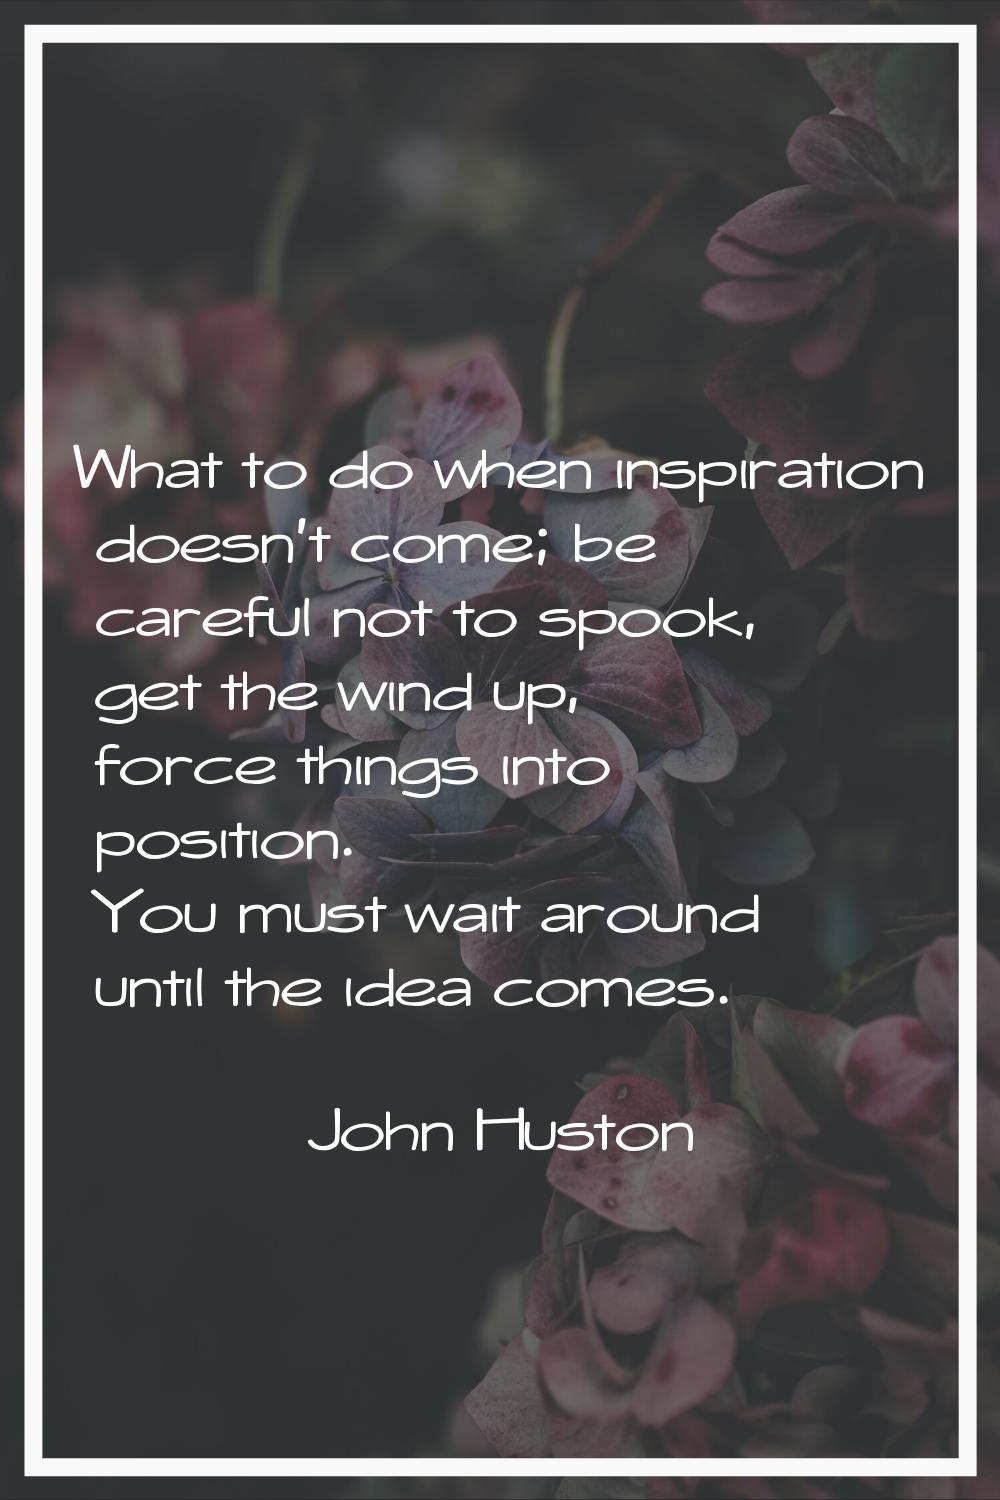 What to do when inspiration doesn't come; be careful not to spook, get the wind up, force things in